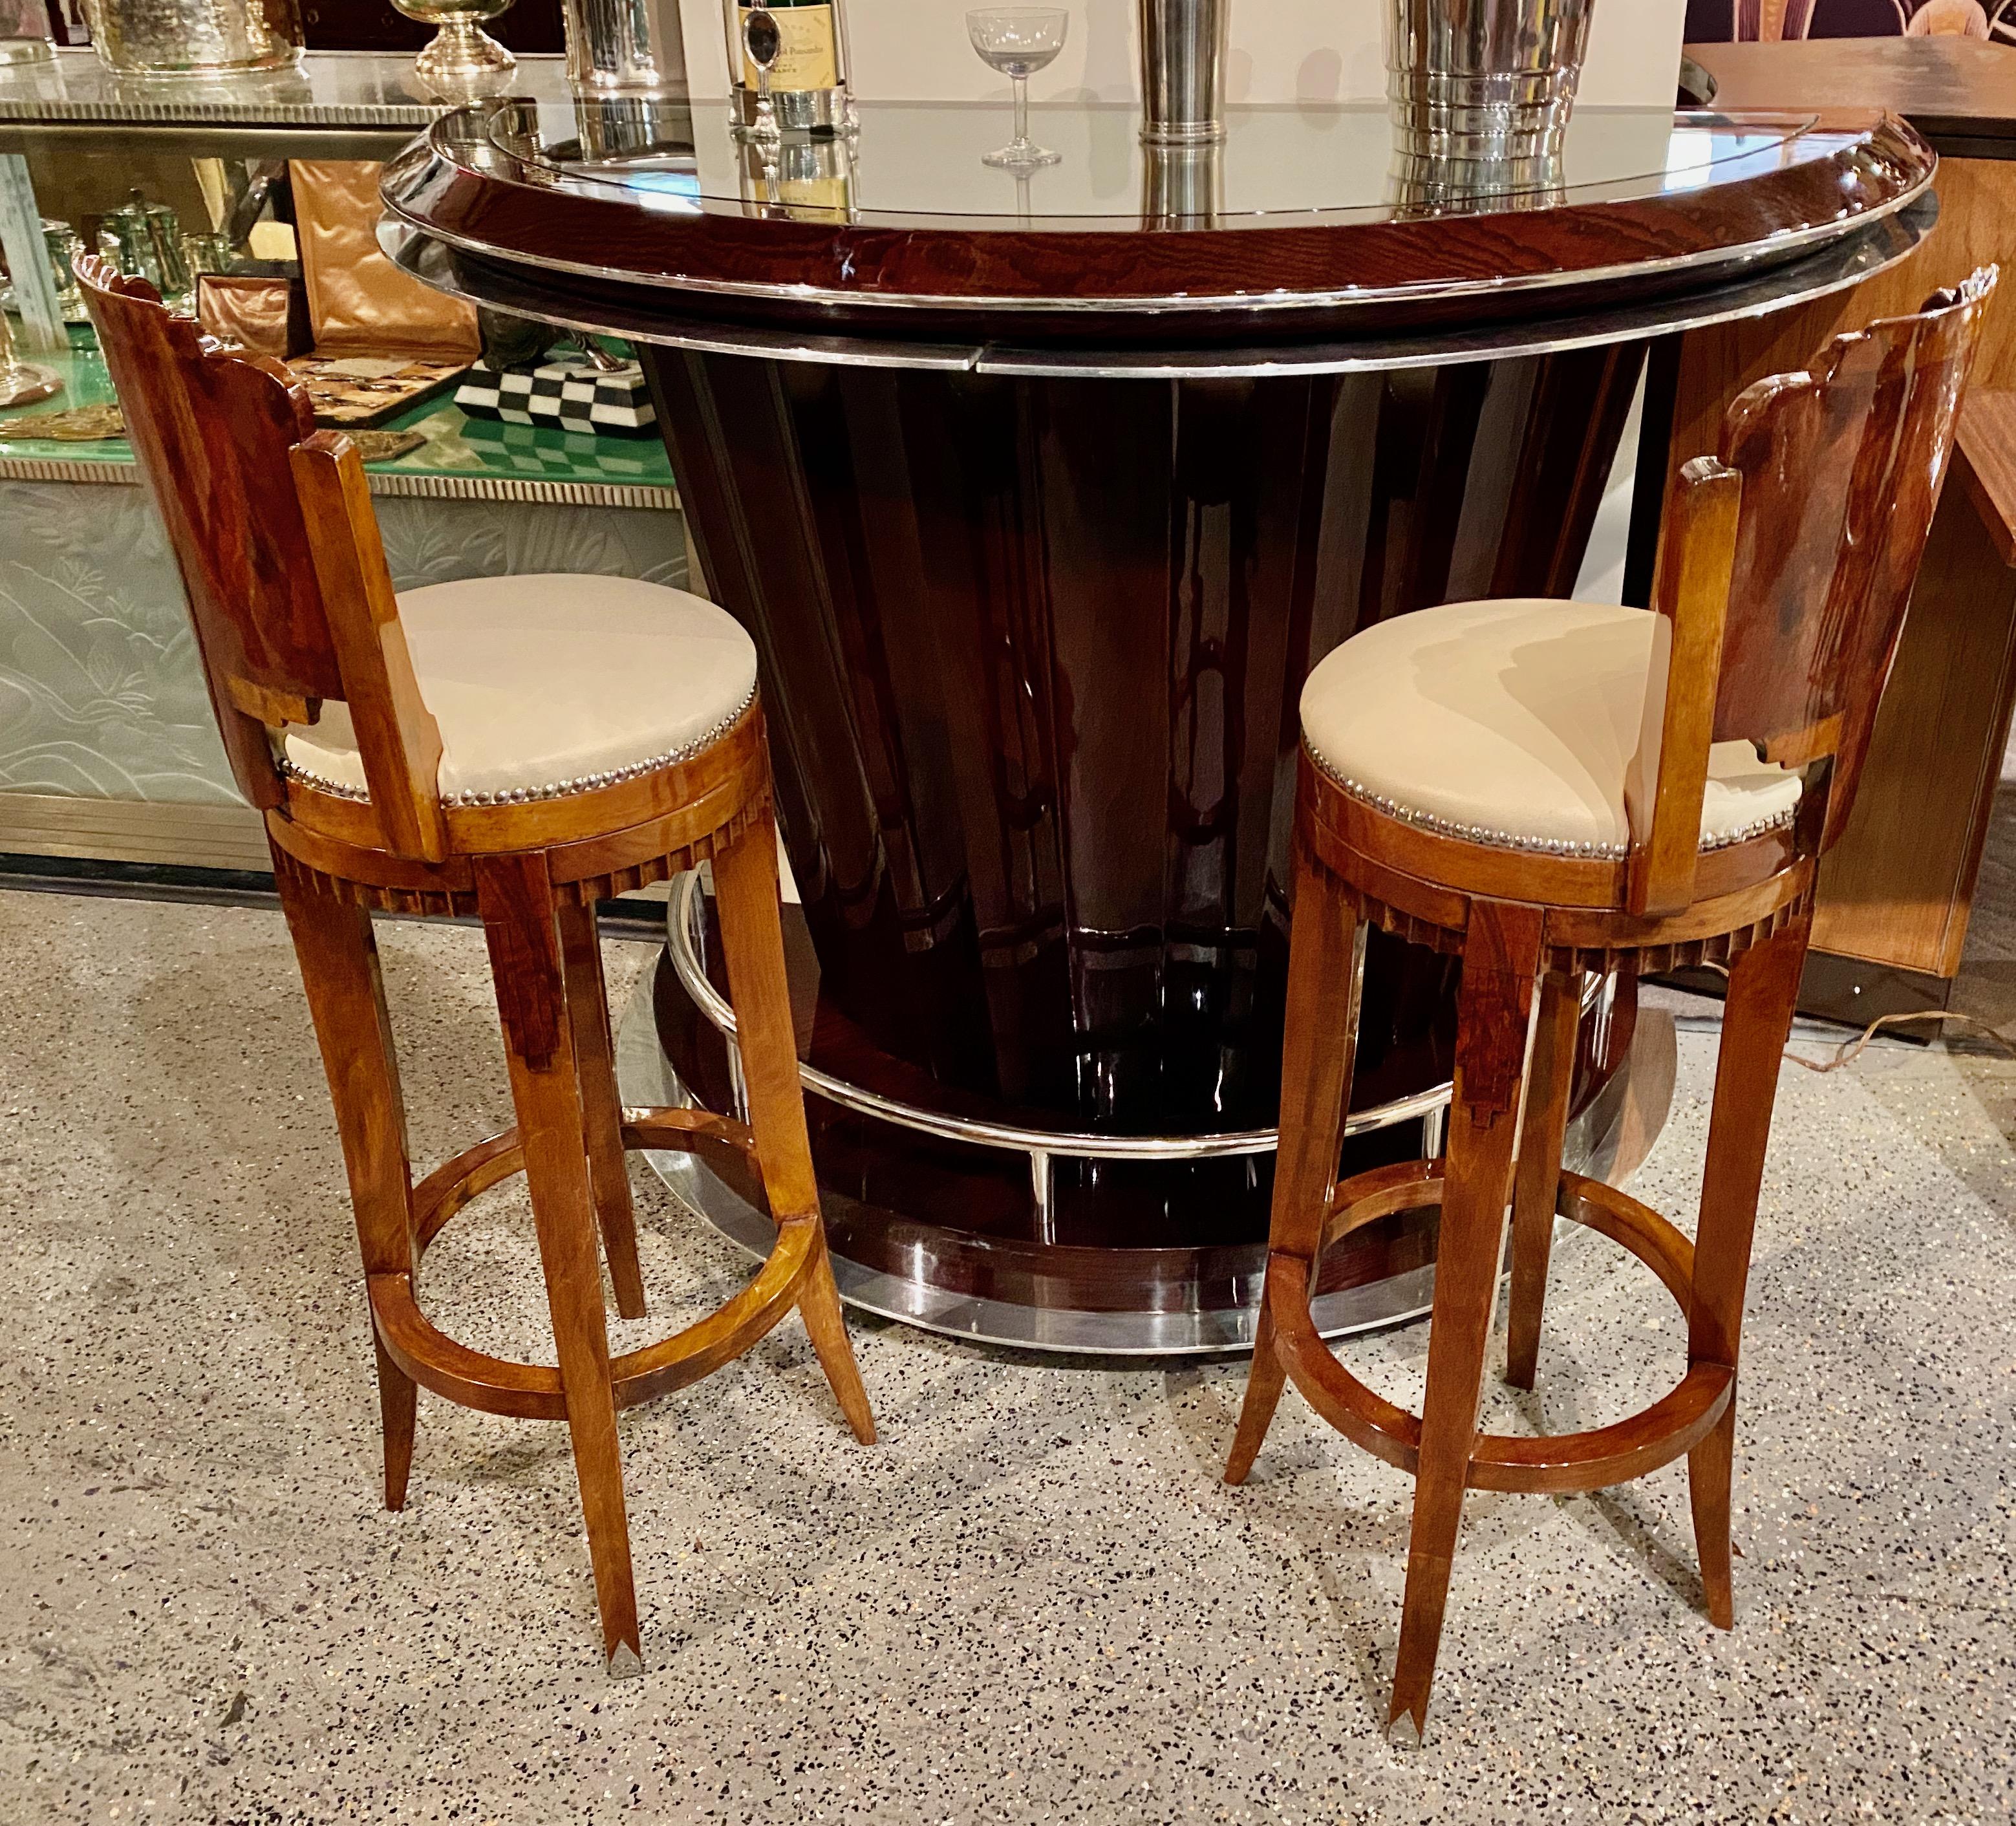 Custom Art Deco swivel wood barstool using exotic woods. Quality materials: French nails used for cream leather upholstery, subtle contrasting woods pronounce some of the design details with the magnified beveled edge of intense walnut graining.